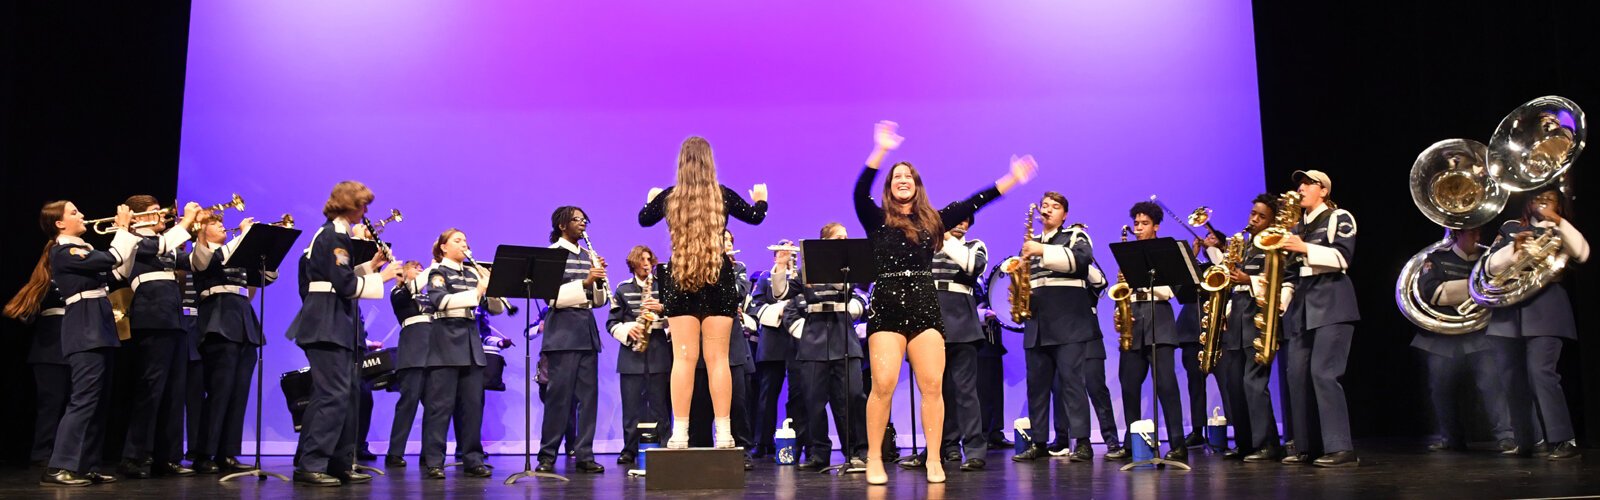 The Wharton High School Marching Band performs on stage in the theater of the New Tampa Performing Arts Center during the inaugural Fall Festival.